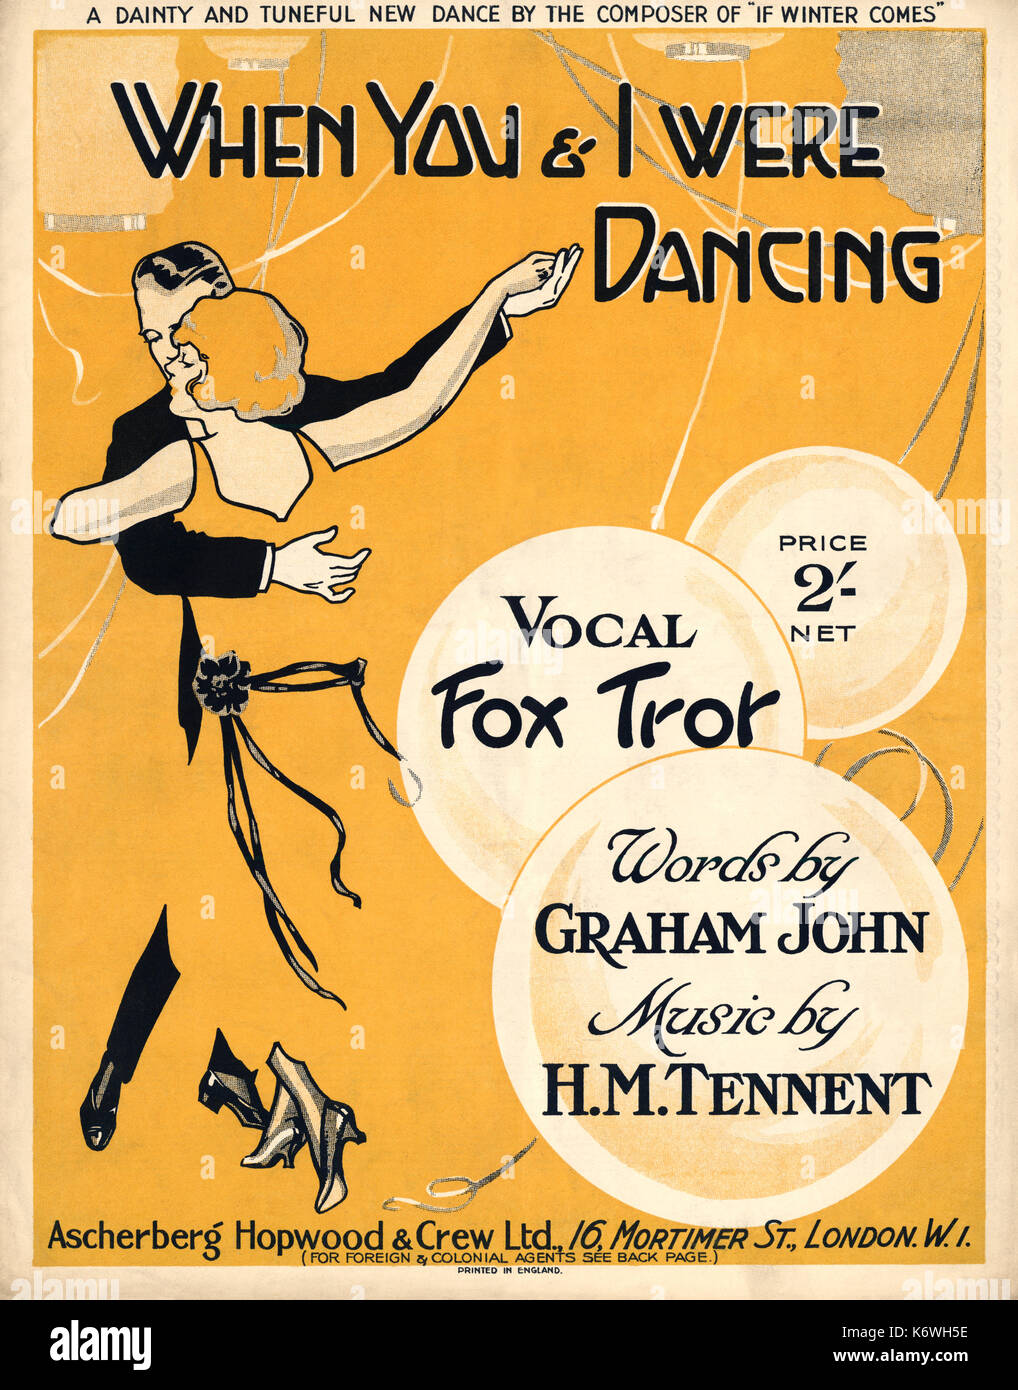 'When you and I were dancing' - vocal fox trot by H.M. Tennent. Words by Graham John. 1923 Published London, Ascherberg Hopwood & Crew Ltd. Stock Photo